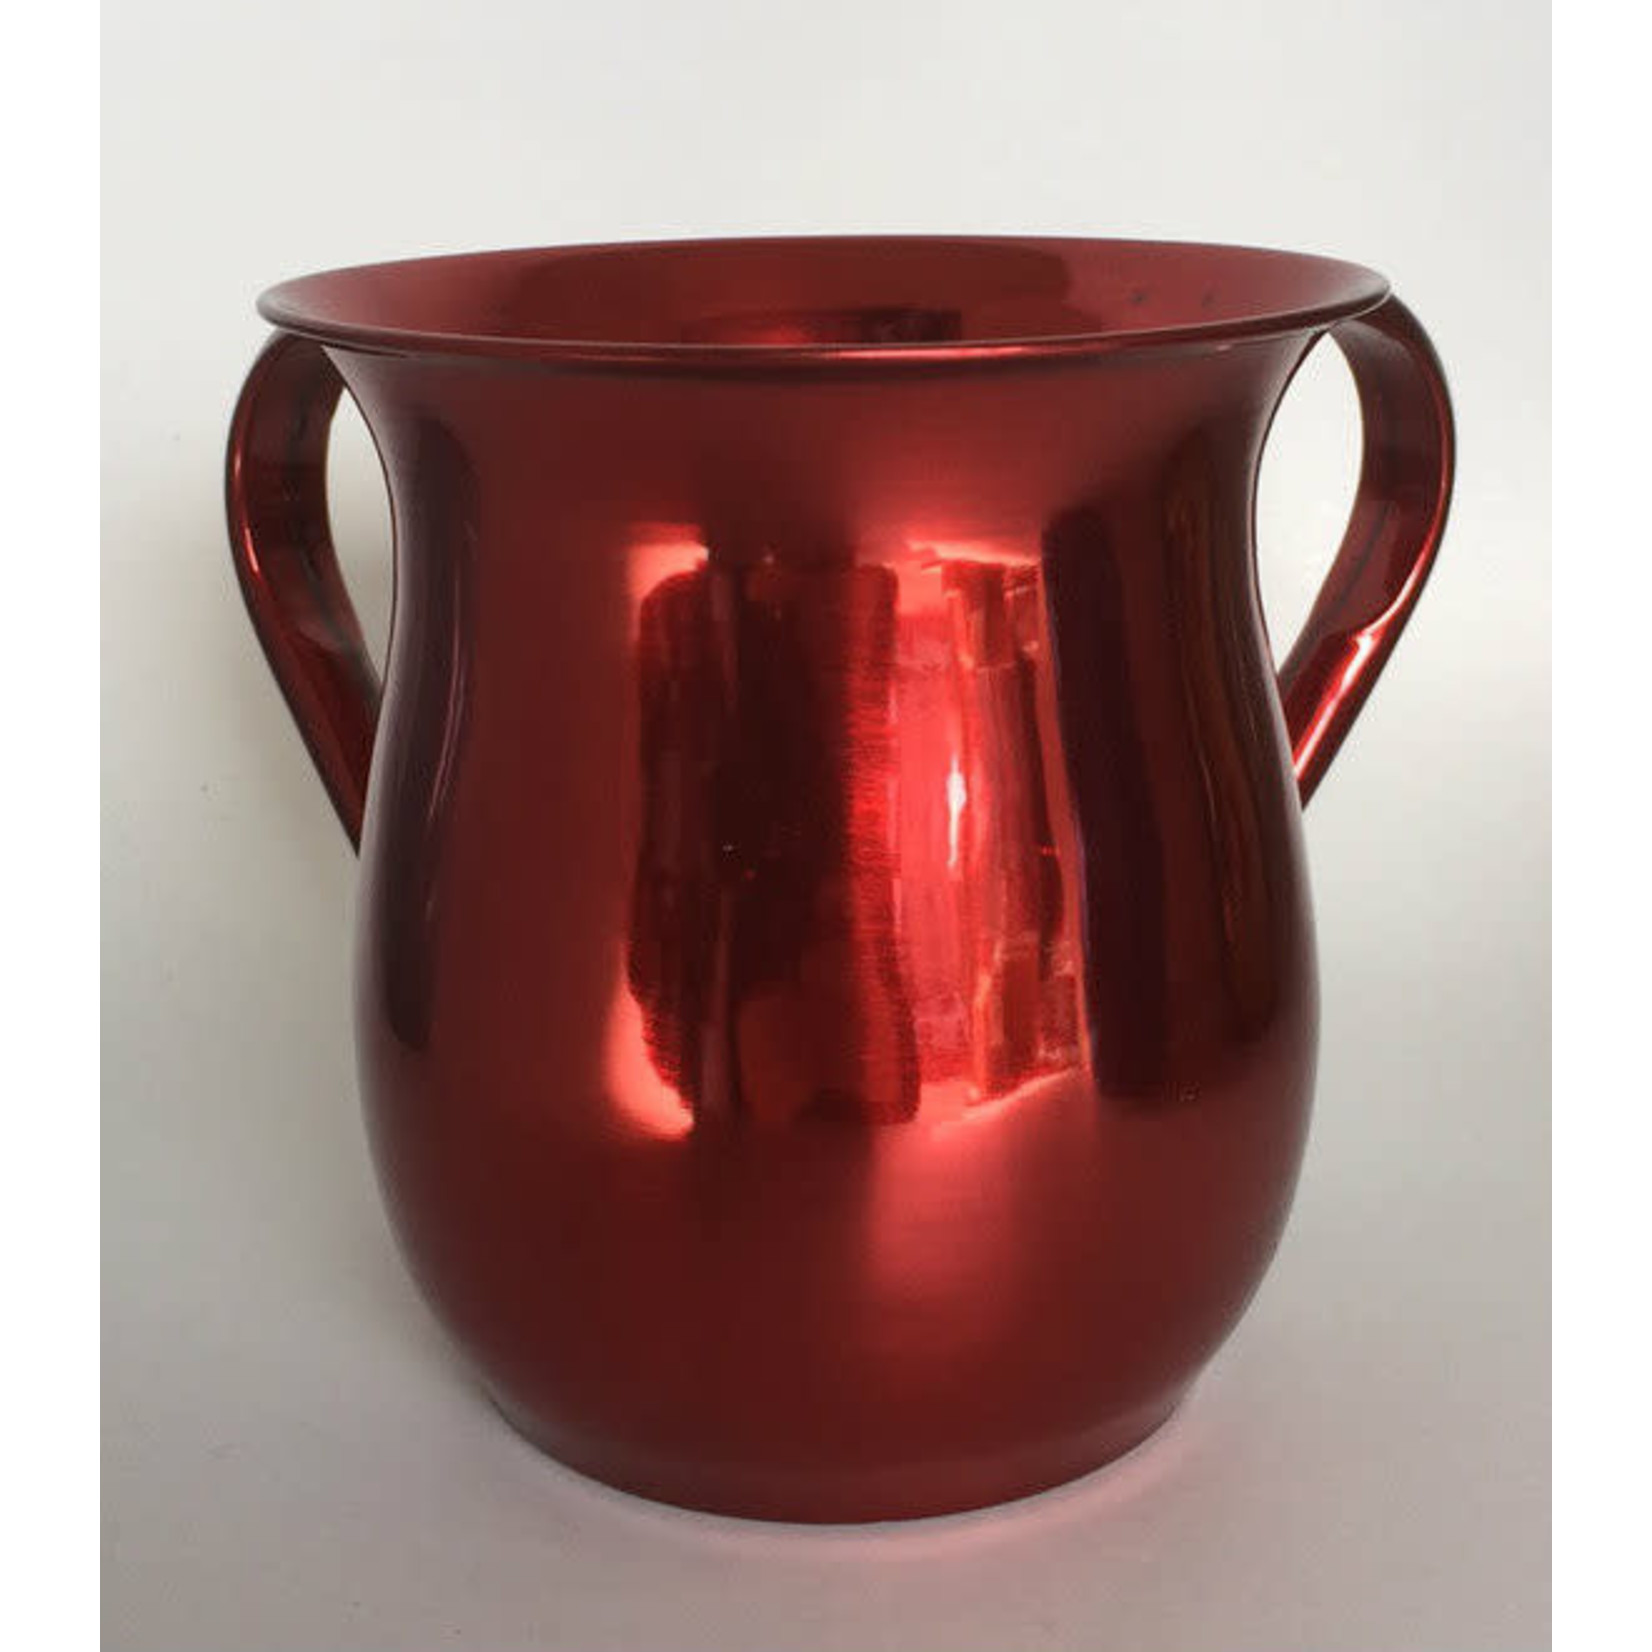 Washing Cup, Anodized Stainless Steel, Red